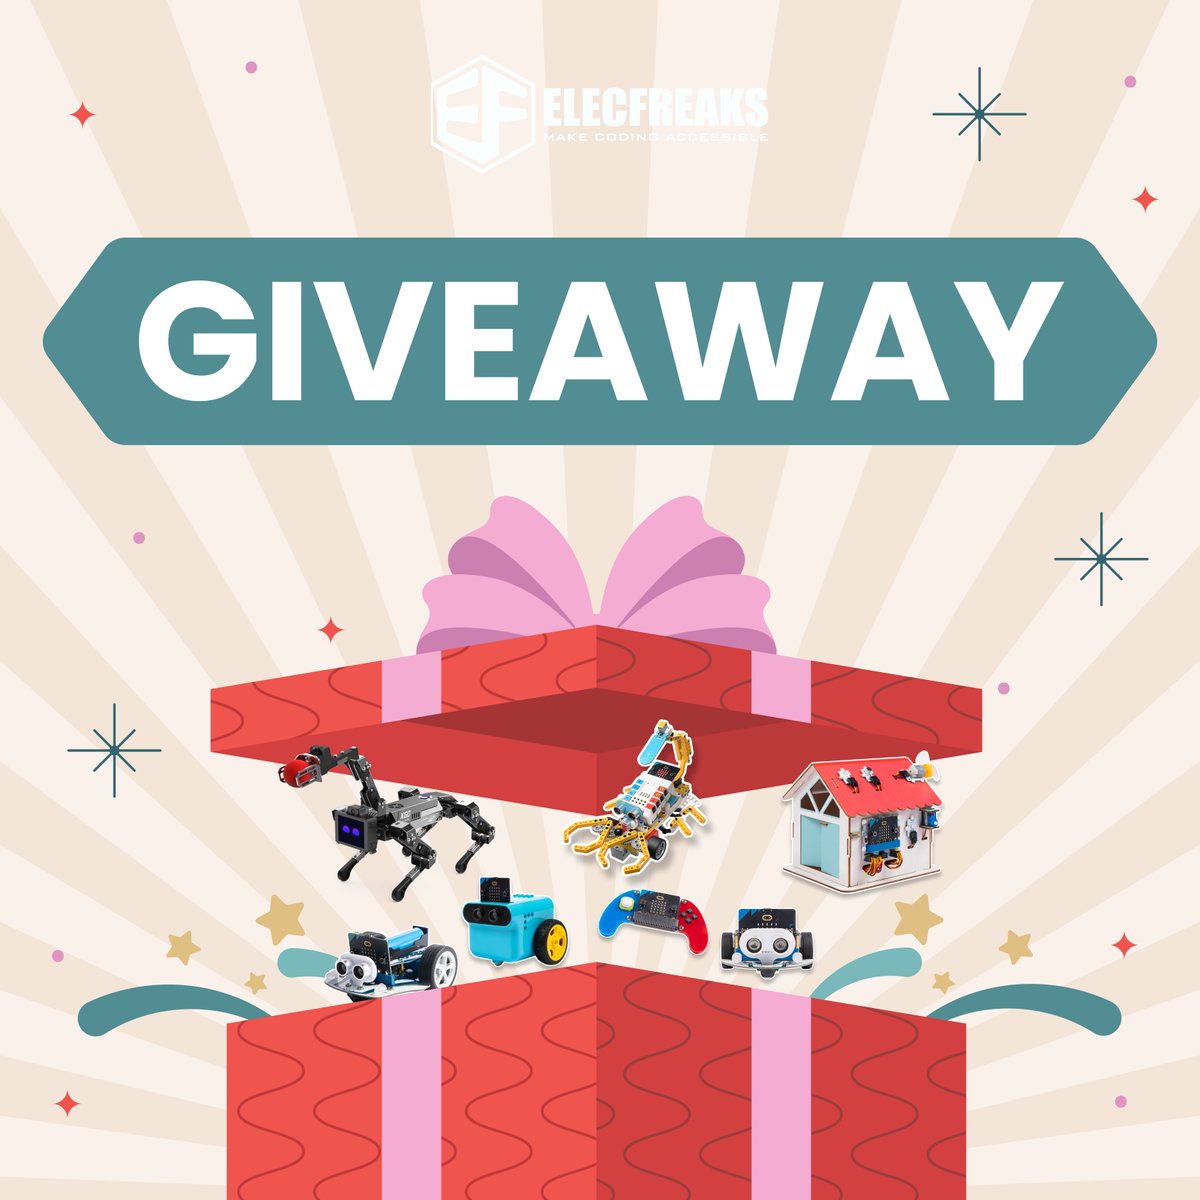 GIVEAWAY! This is an investigation post. Comment on your favorite ELECFREAKS products and you will have a chance to win a learning gift package worth $100 for your kids. To enter: ❤️ Like this post and repost ☀️ Follow @elecfreaks 🌼 Comment below One lucky winner will win it